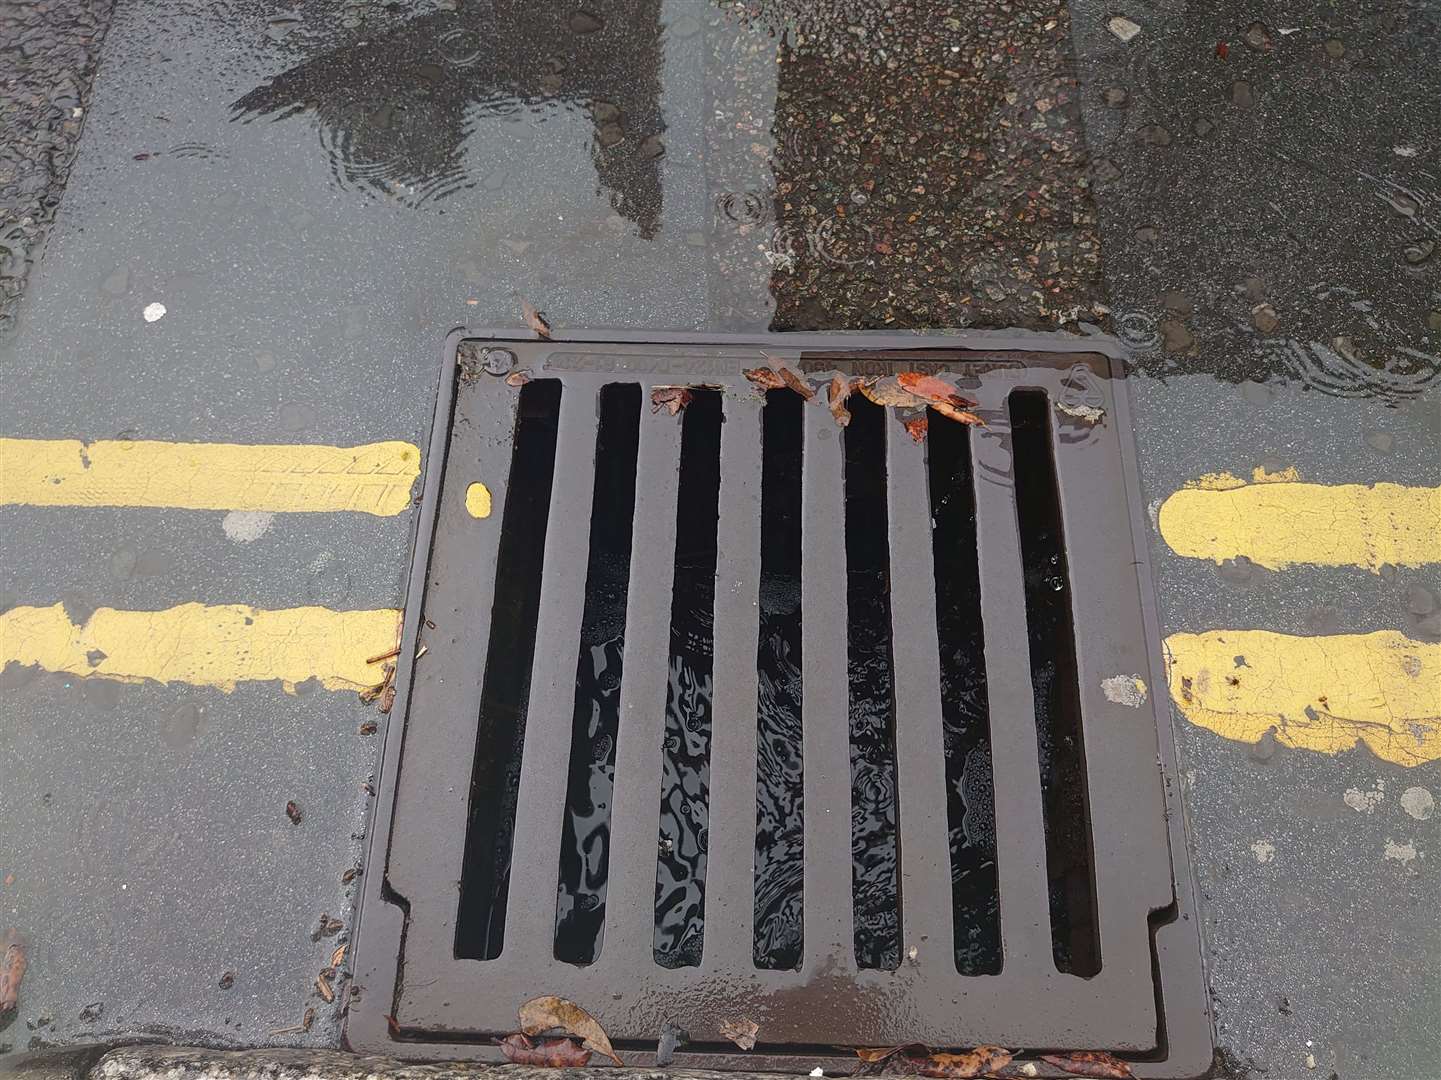 The drains filled up with water